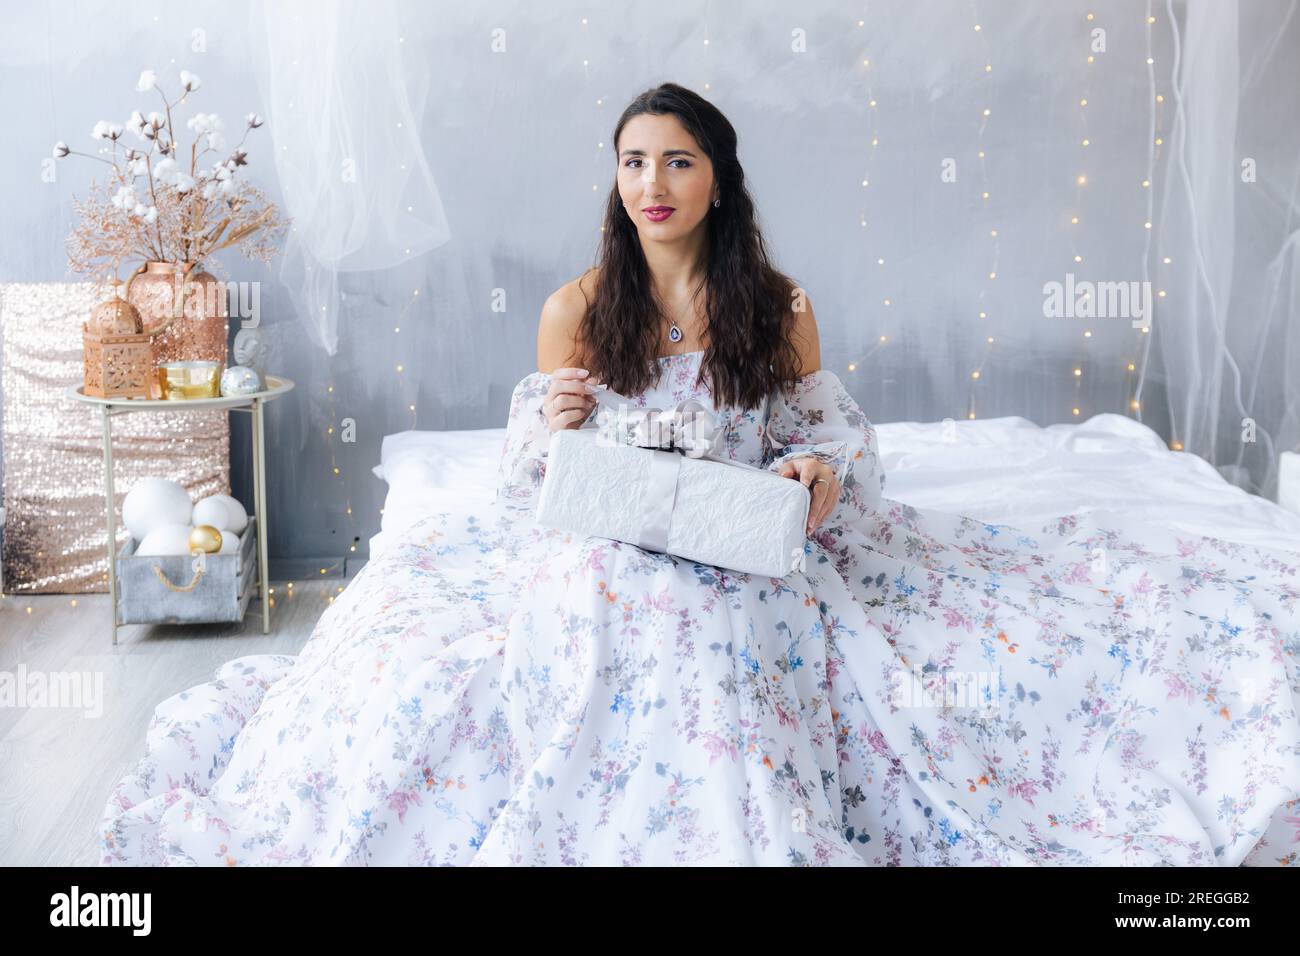 A girl in a white dress unpacks a gift Stock Photo